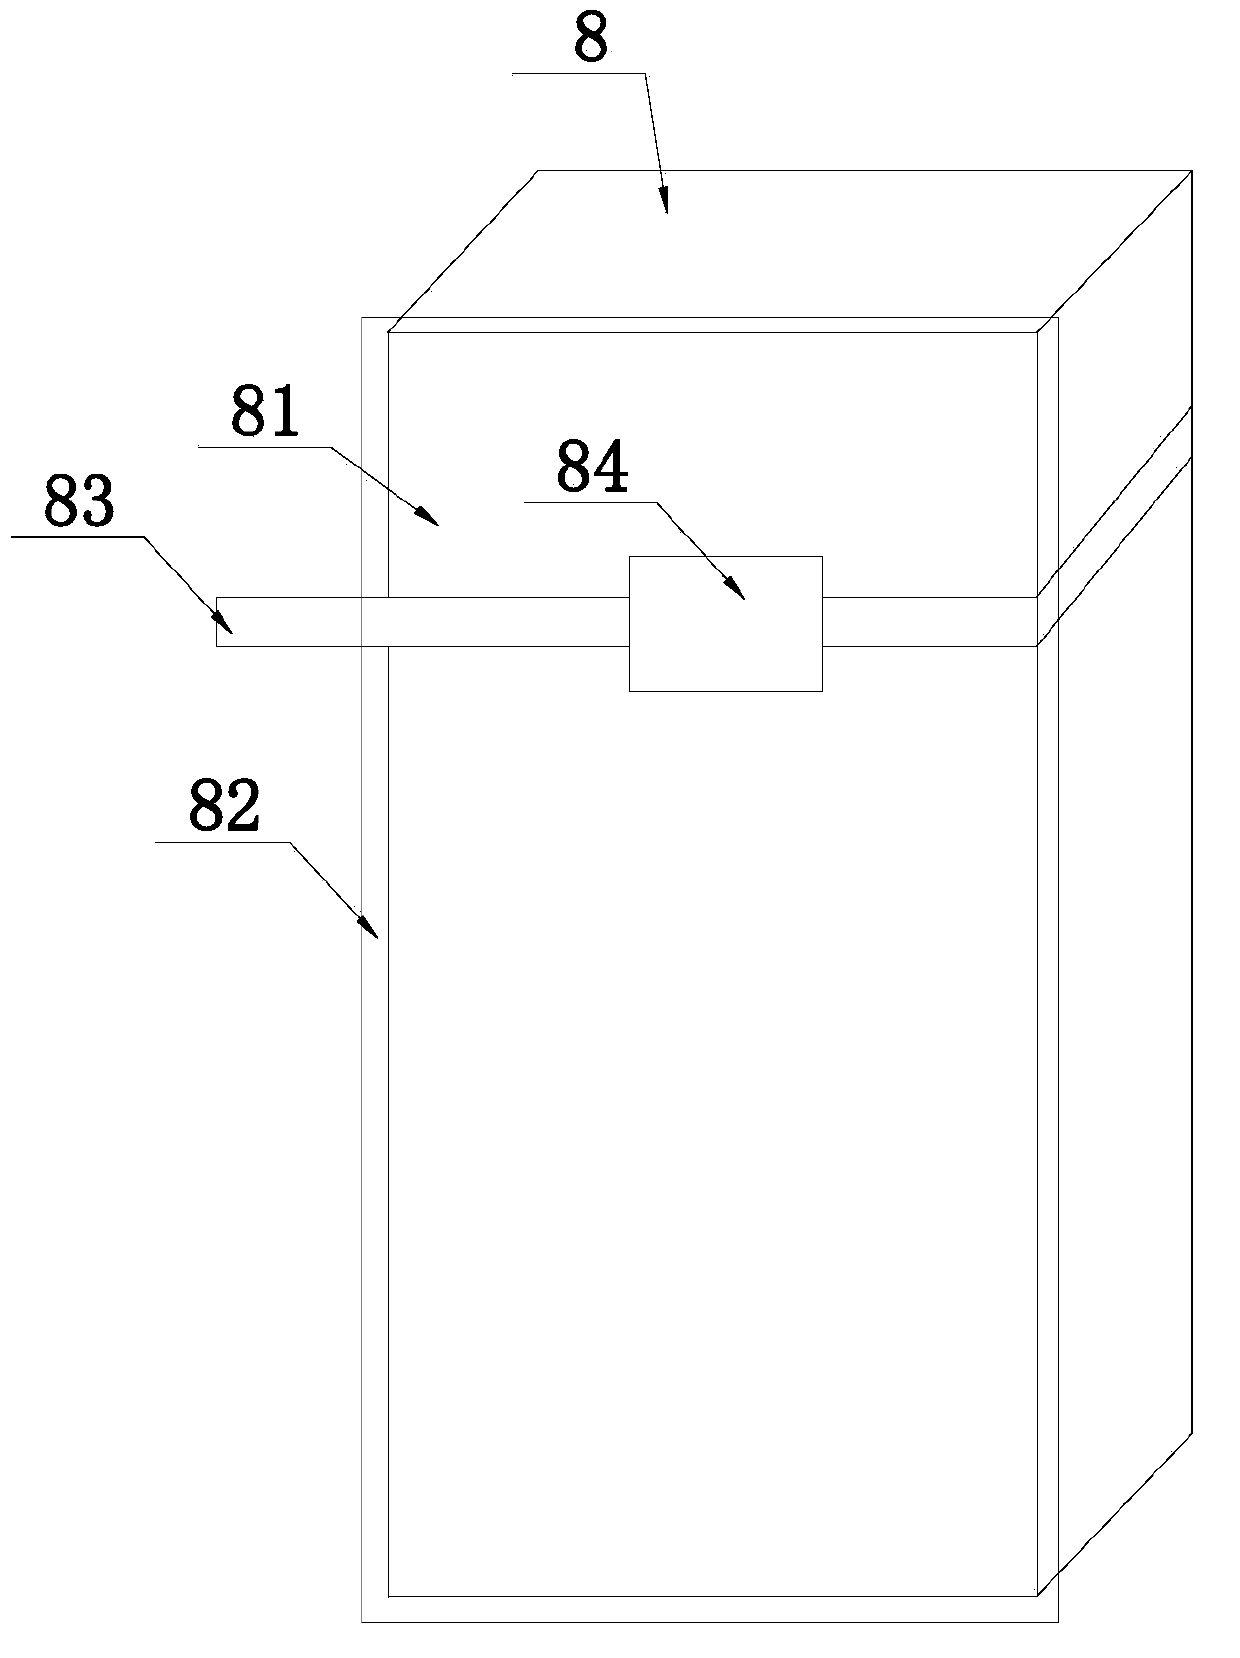 Method for tracing single cigarette packet